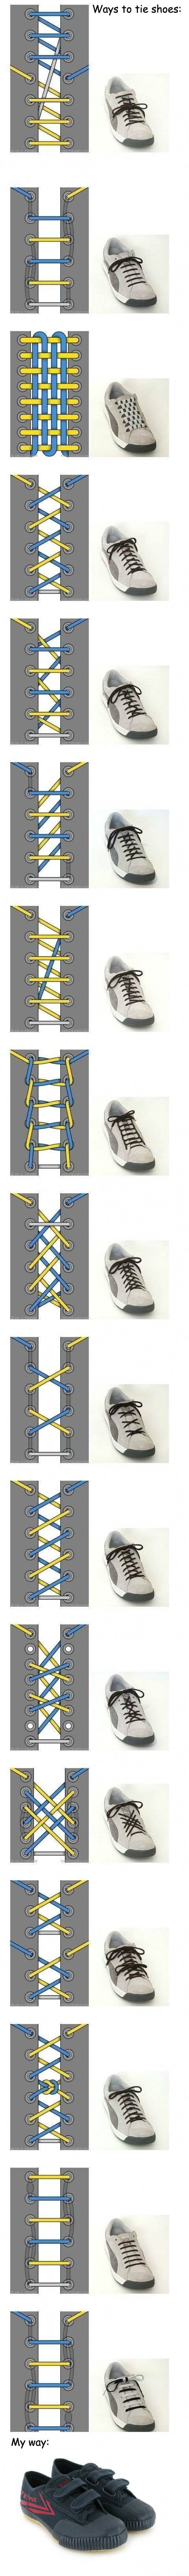 Several ways to tie shoes.